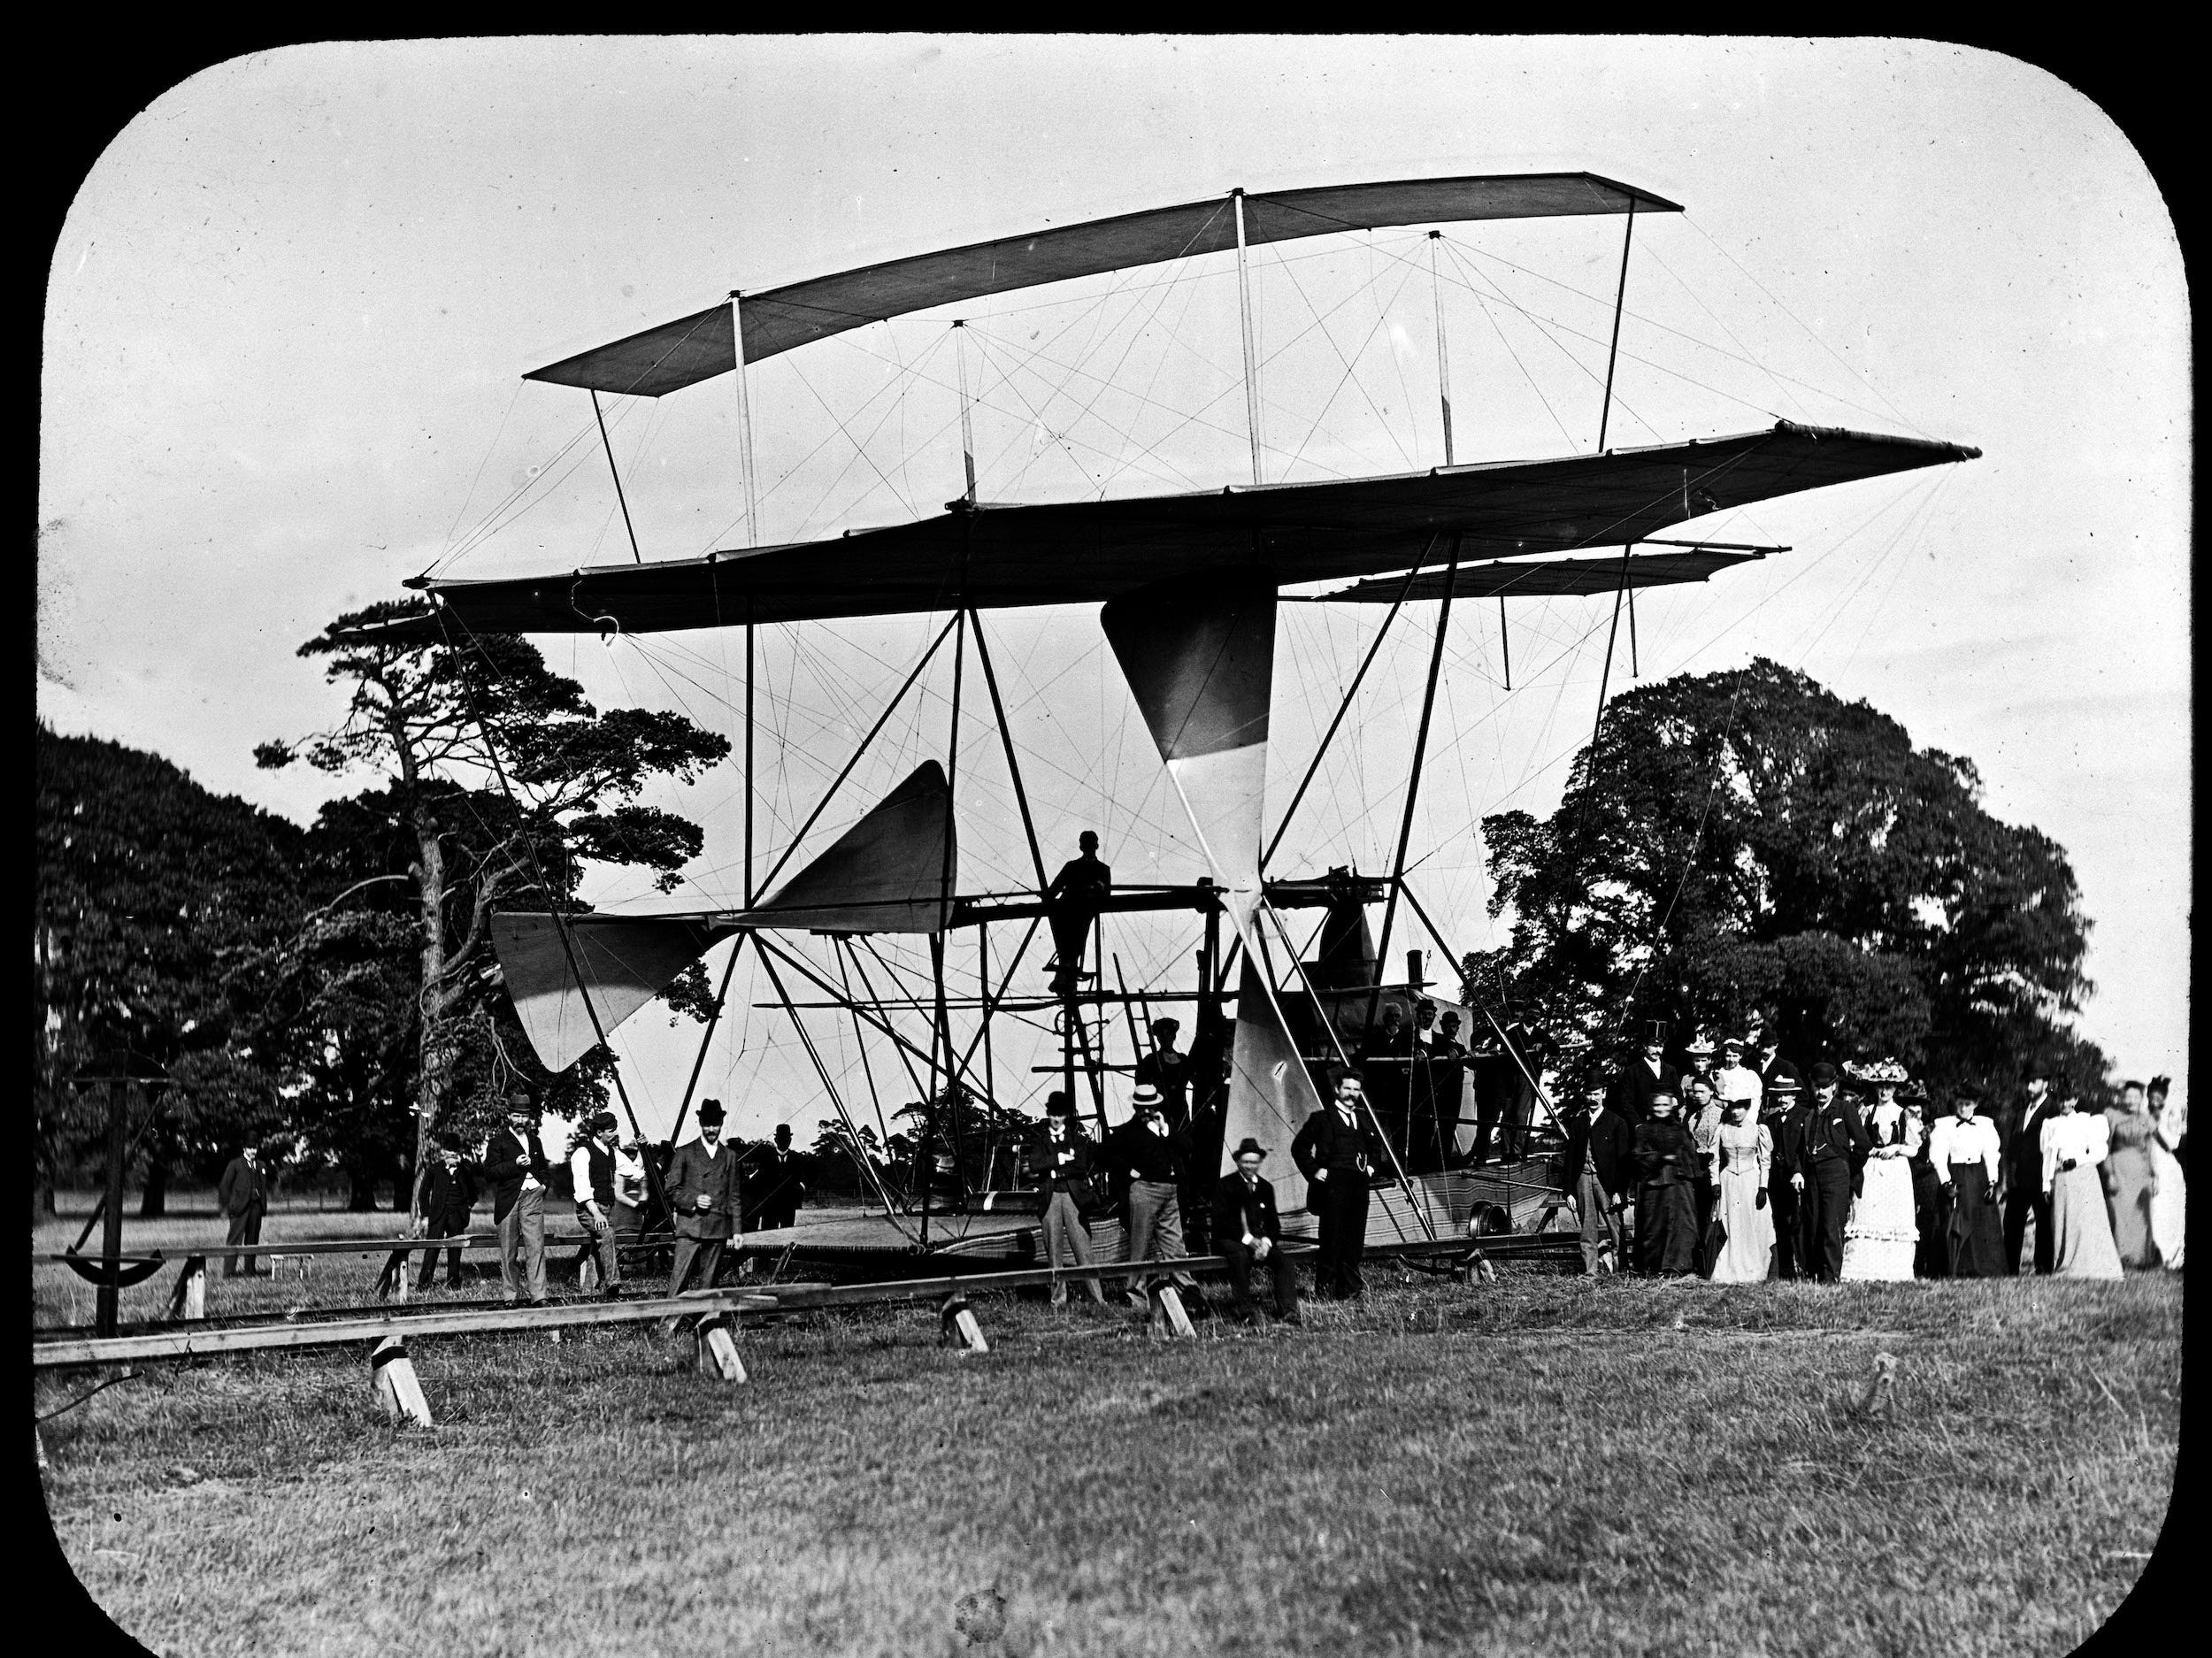 An image of Maxims flying machine with its 104-foot wingspan and weighing 8000 pounds